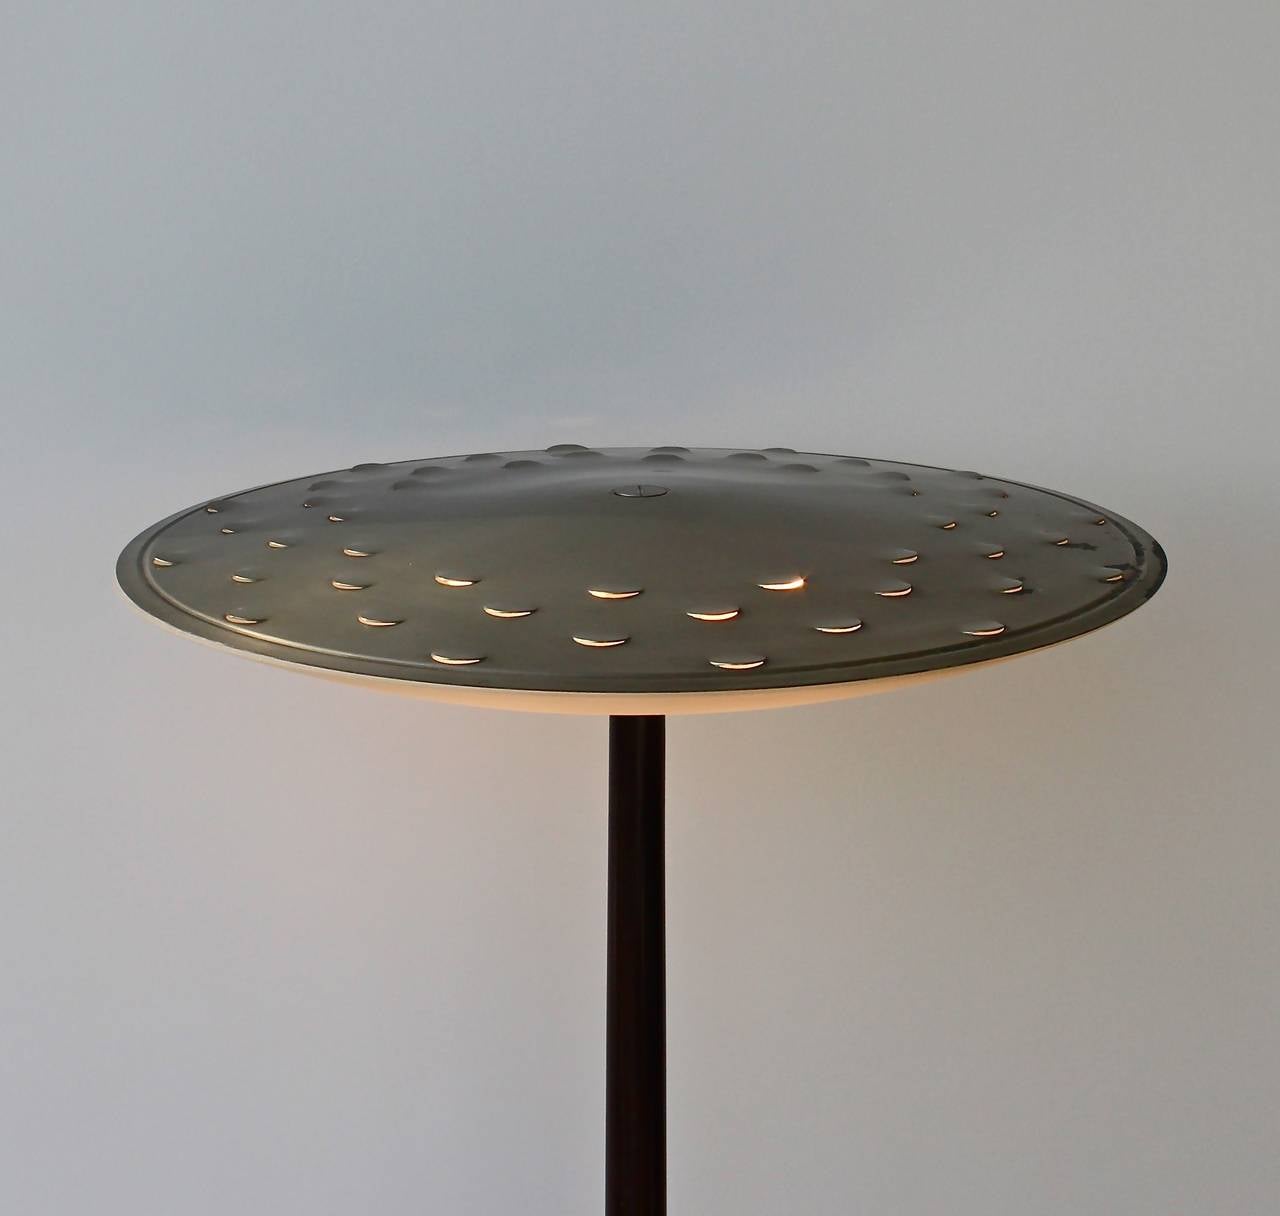 Rare floor lamp in wood and oxidised nickelled brass with a sanded glass dish by Max Ingrand for Fontana Arte. Metal diffuser with semi-circular cuts allowing the light to shine through.
As far as we know this model no 2143 has not been seen on the